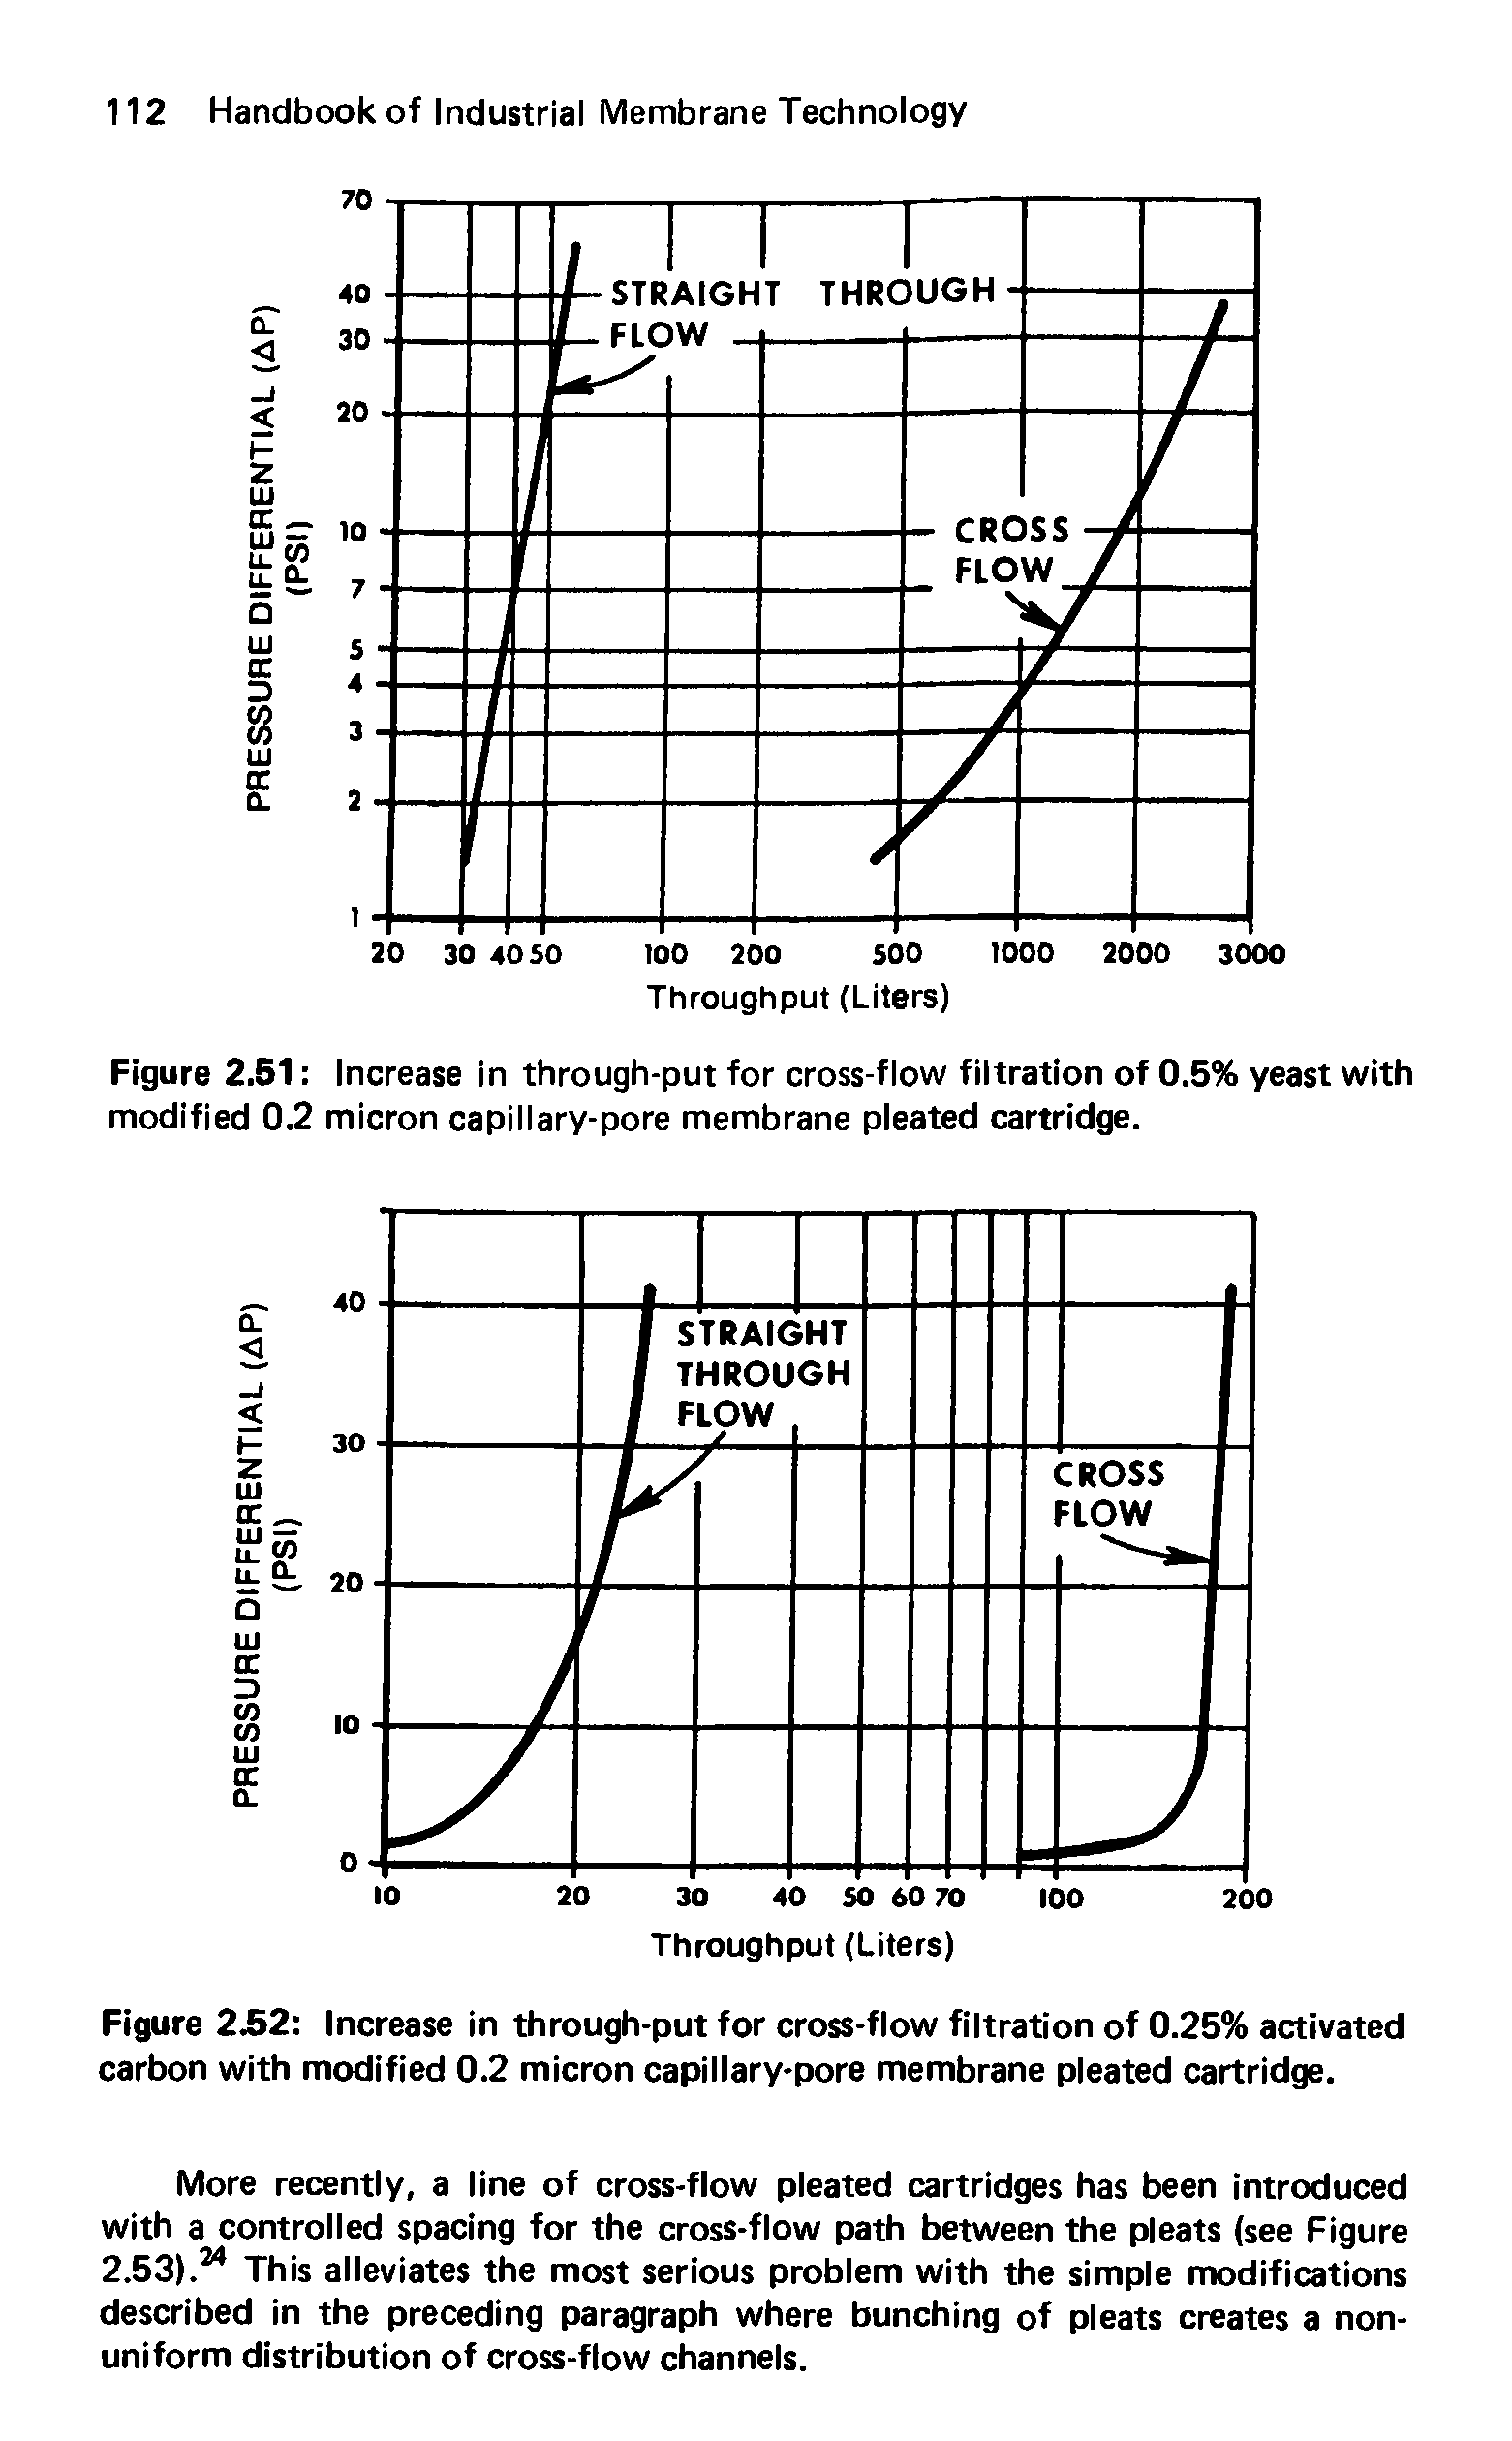 Figure 2.51 Increase in through-put for cross-flow filtration of 0.5% yeast with modified 0.2 micron capillary-pore membrane pleated cartridge.